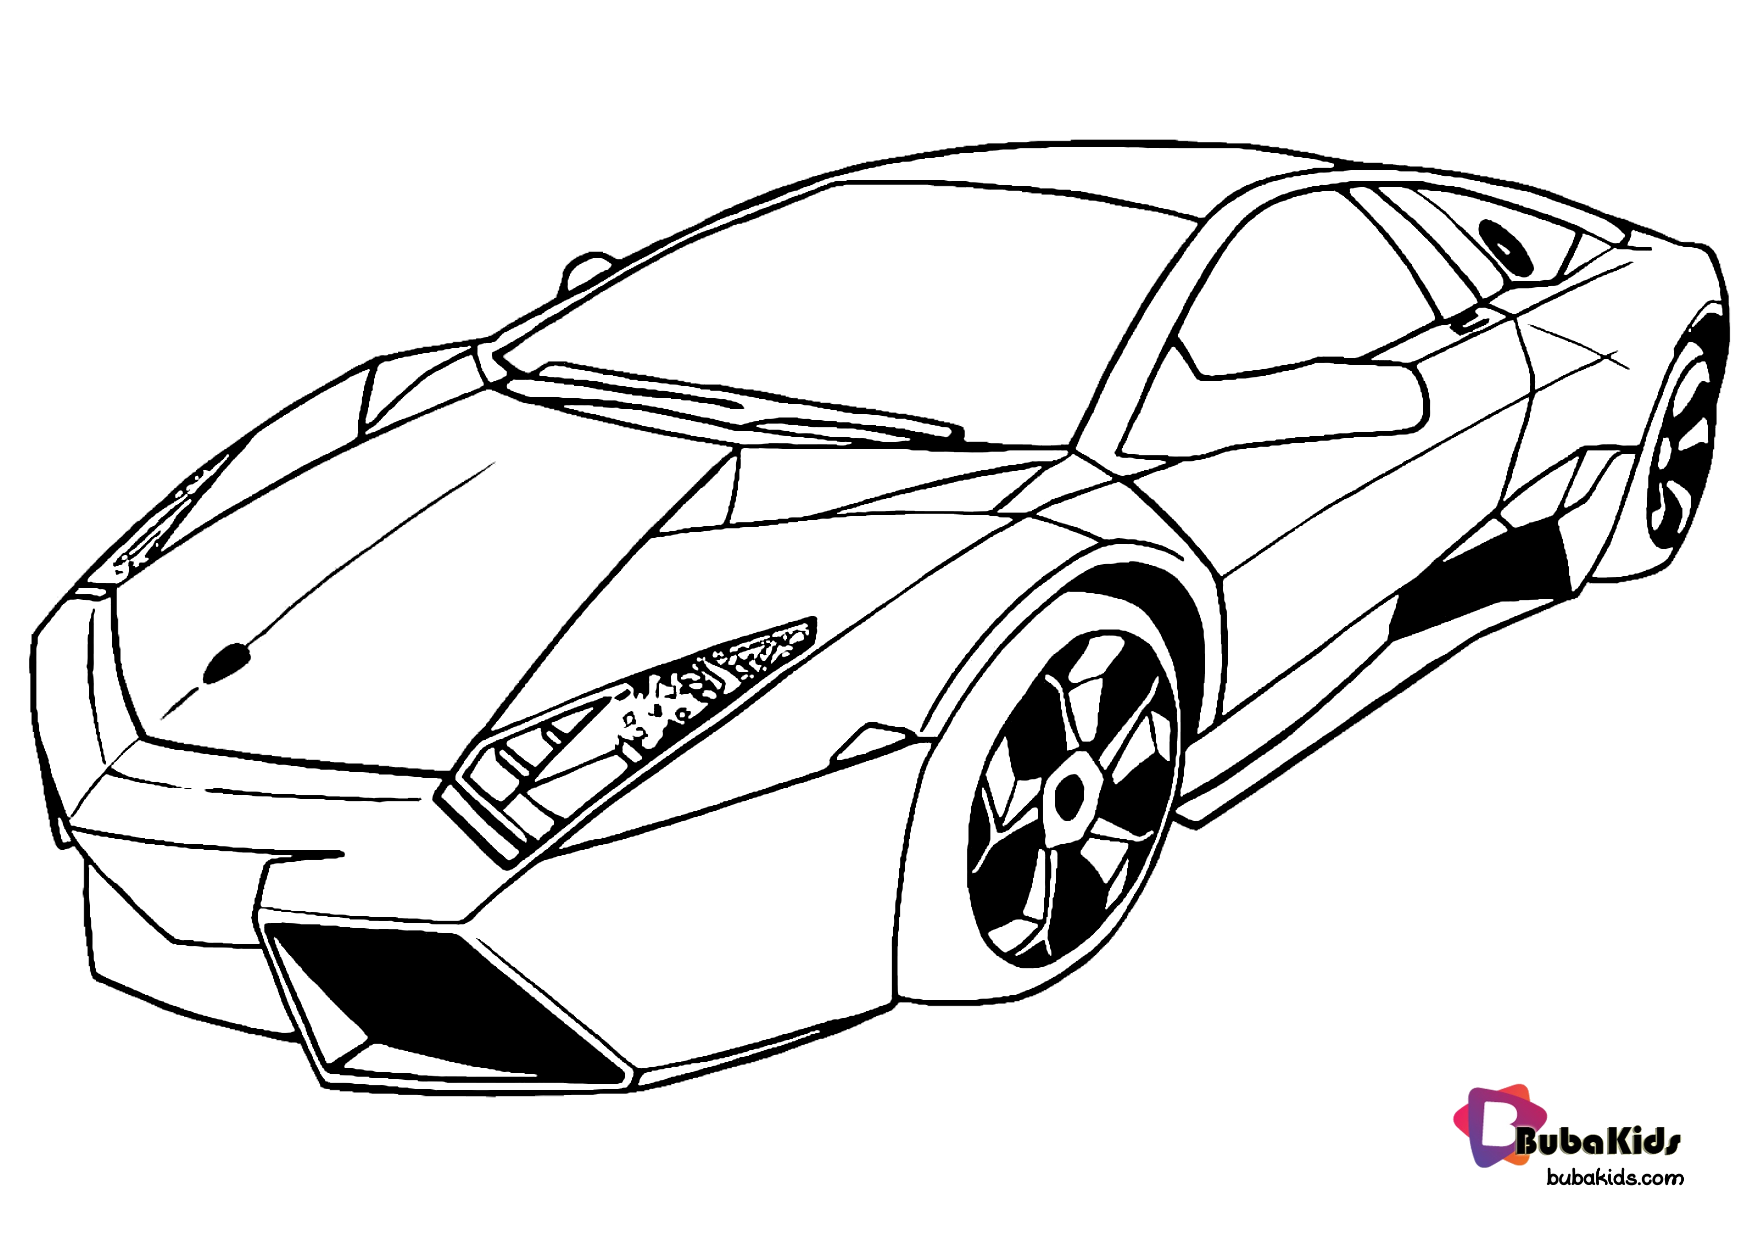 Free Download And Printable Super Car Coloring Page BubaKids